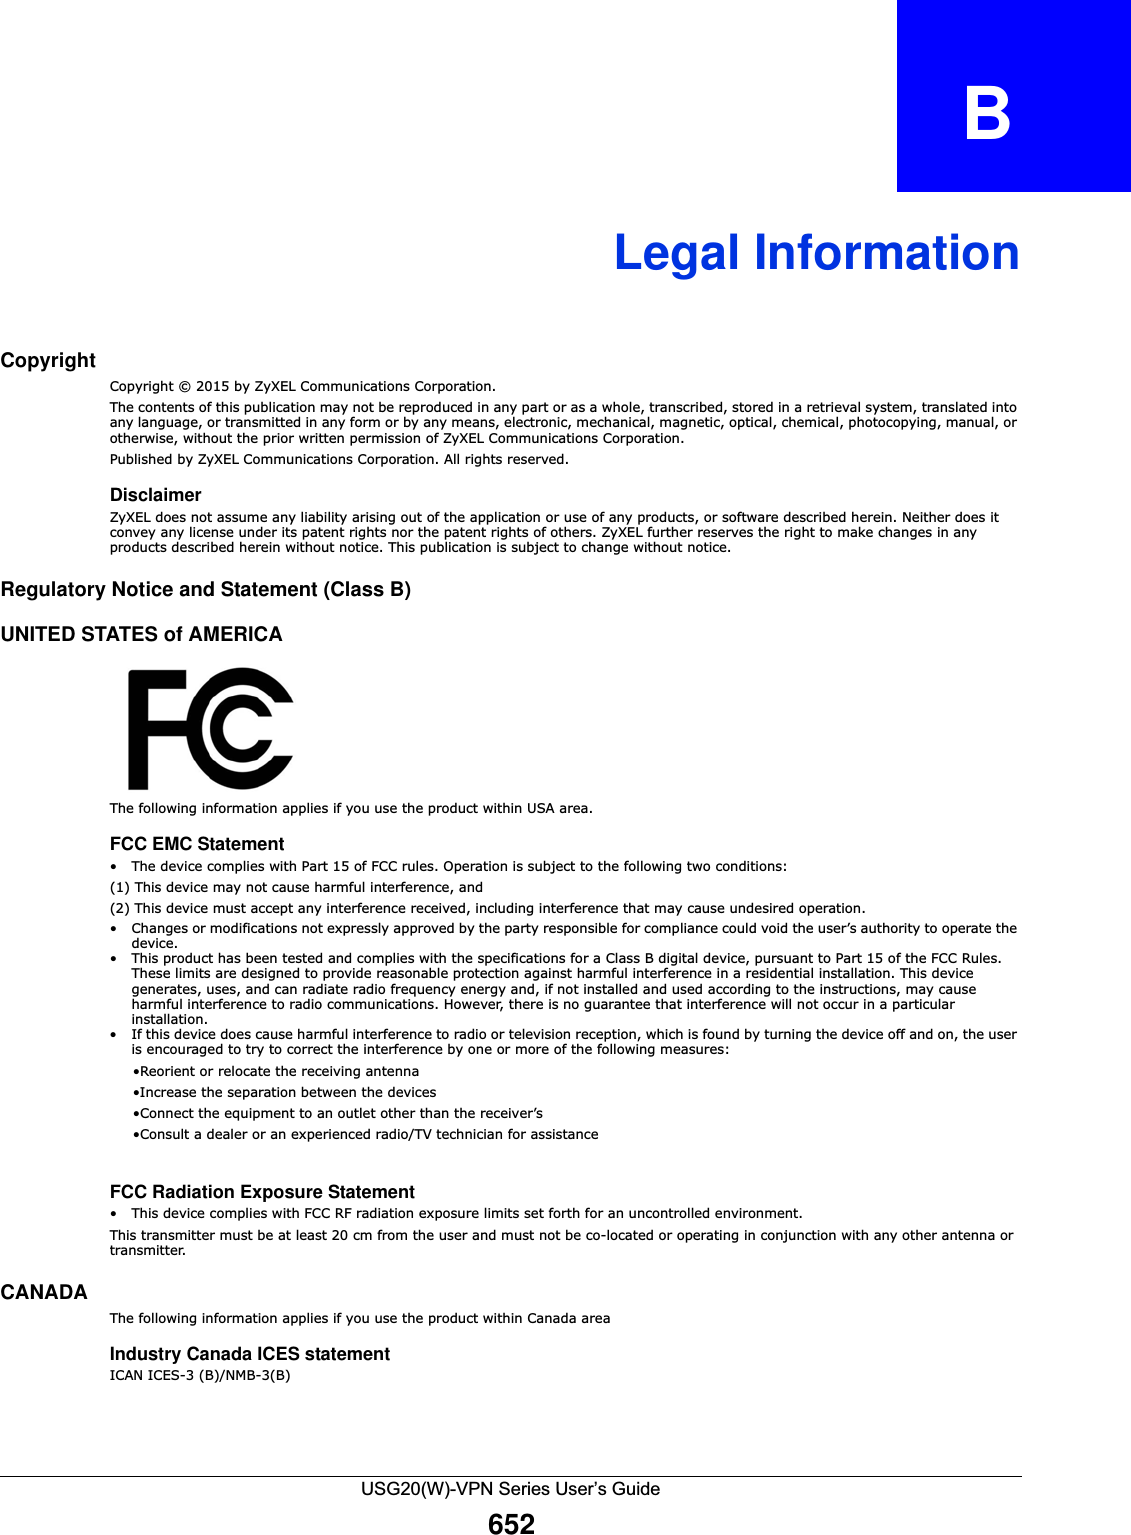 USG20(W)-VPN Series User’s Guide652APPENDIX   BLegal InformationCopyrightCopyright © 2015 by ZyXEL Communications Corporation.The contents of this publication may not be reproduced in any part or as a whole, transcribed, stored in a retrieval system, translated into any language, or transmitted in any form or by any means, electronic, mechanical, magnetic, optical, chemical, photocopying, manual, or otherwise, without the prior written permission of ZyXEL Communications Corporation.Published by ZyXEL Communications Corporation. All rights reserved.DisclaimerZyXEL does not assume any liability arising out of the application or use of any products, or software described herein. Neither does it convey any license under its patent rights nor the patent rights of others. ZyXEL further reserves the right to make changes in any products described herein without notice. This publication is subject to change without notice.Regulatory Notice and Statement (Class B) UNITED STATES of AMERICAThe following information applies if you use the product within USA area.FCC EMC Statement• The device complies with Part 15 of FCC rules. Operation is subject to the following two conditions:(1) This device may not cause harmful interference, and (2) This device must accept any interference received, including interference that may cause undesired operation.• Changes or modifications not expressly approved by the party responsible for compliance could void the user’s authority to operate the device.• This product has been tested and complies with the specifications for a Class B digital device, pursuant to Part 15 of the FCC Rules. These limits are designed to provide reasonable protection against harmful interference in a residential installation. This device generates, uses, and can radiate radio frequency energy and, if not installed and used according to the instructions, may cause harmful interference to radio communications. However, there is no guarantee that interference will not occur in a particular installation. • If this device does cause harmful interference to radio or television reception, which is found by turning the device off and on, the user is encouraged to try to correct the interference by one or more of the following measures:     •Reorient or relocate the receiving antenna      •Increase the separation between the devices      •Connect the equipment to an outlet other than the receiver’s      •Consult a dealer or an experienced radio/TV technician for assistanceFCC Radiation Exposure Statement• This device complies with FCC RF radiation exposure limits set forth for an uncontrolled environment. This transmitter must be at least 20 cm from the user and must not be co-located or operating in conjunction with any other antenna or transmitter.CANADA  The following information applies if you use the product within Canada areaIndustry Canada ICES statementICAN ICES-3 (B)/NMB-3(B)